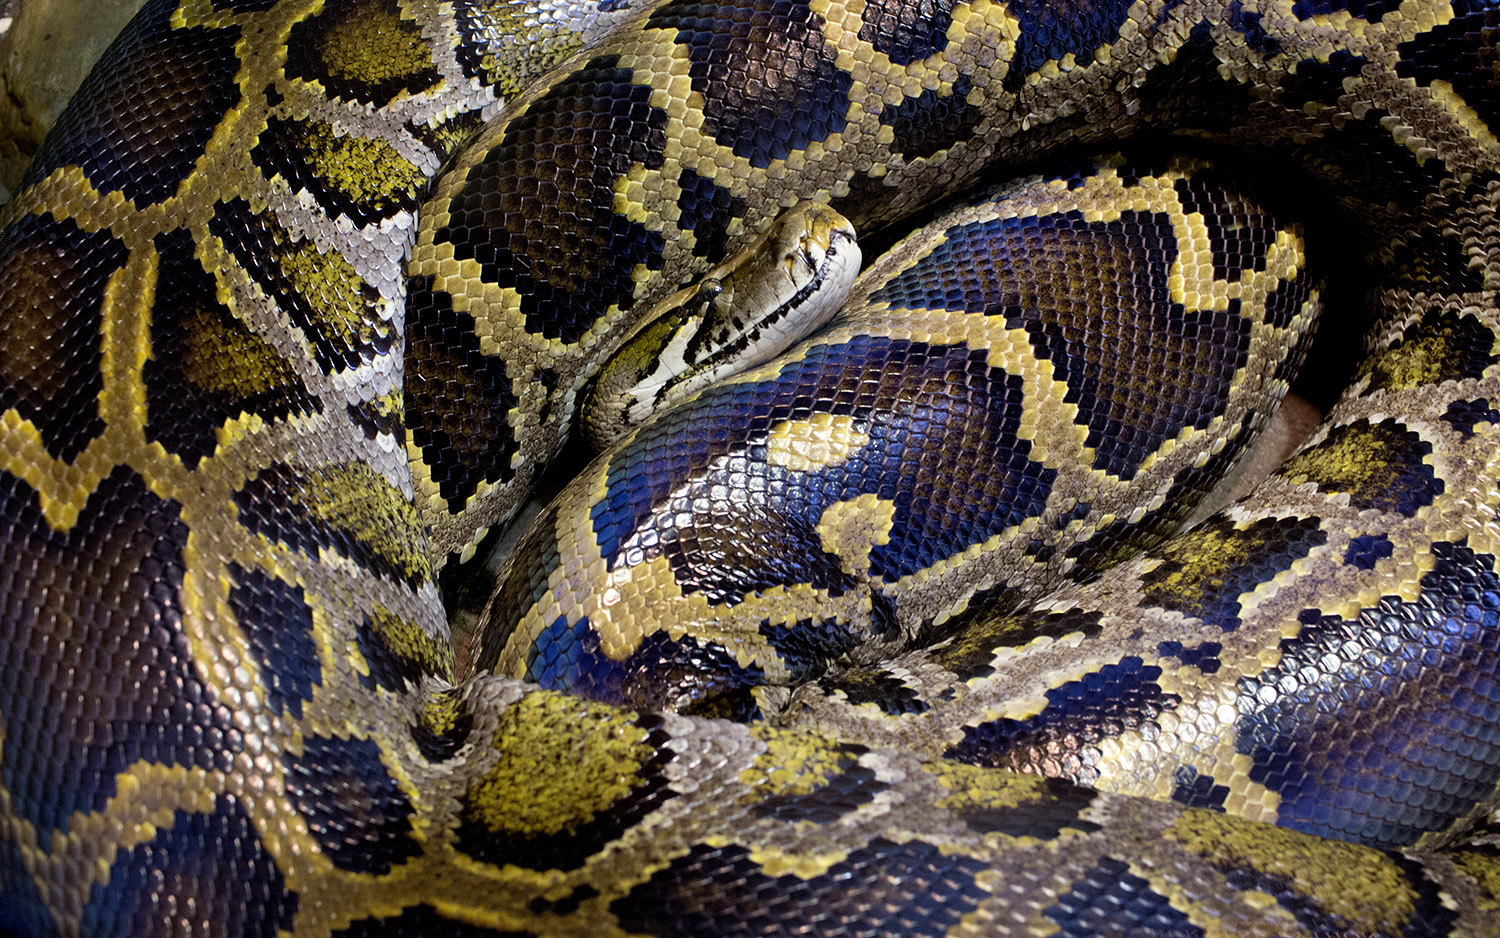 How a Python Ate a Woman Whole and Left Hardly a Trace of the Fierce Attack  | Live Science